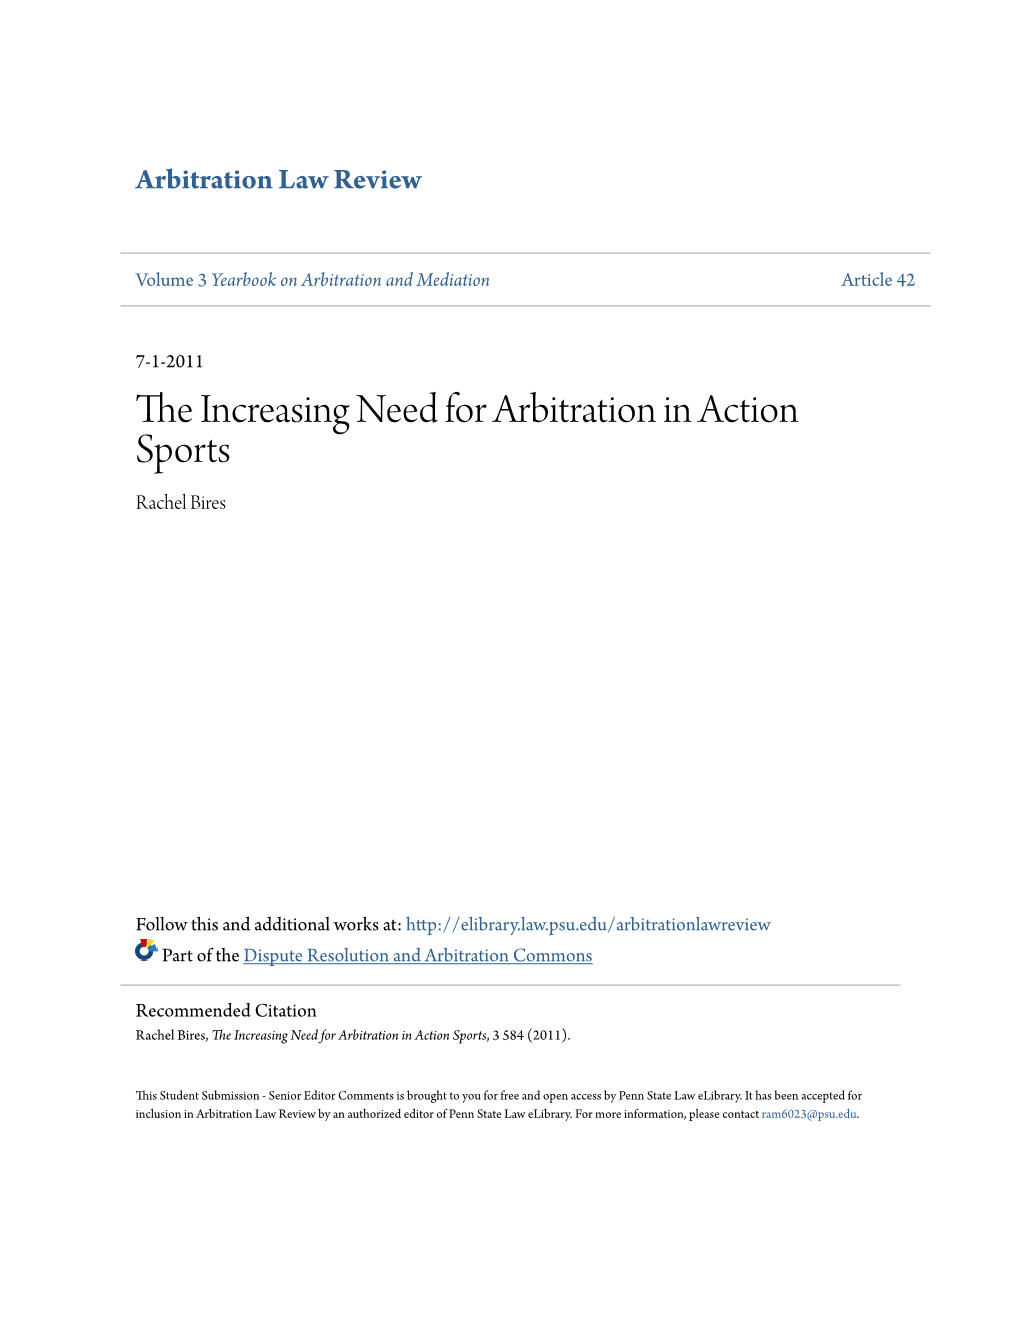 The Increasing Need for Arbitration in Action Sports, 3 584 (2011)